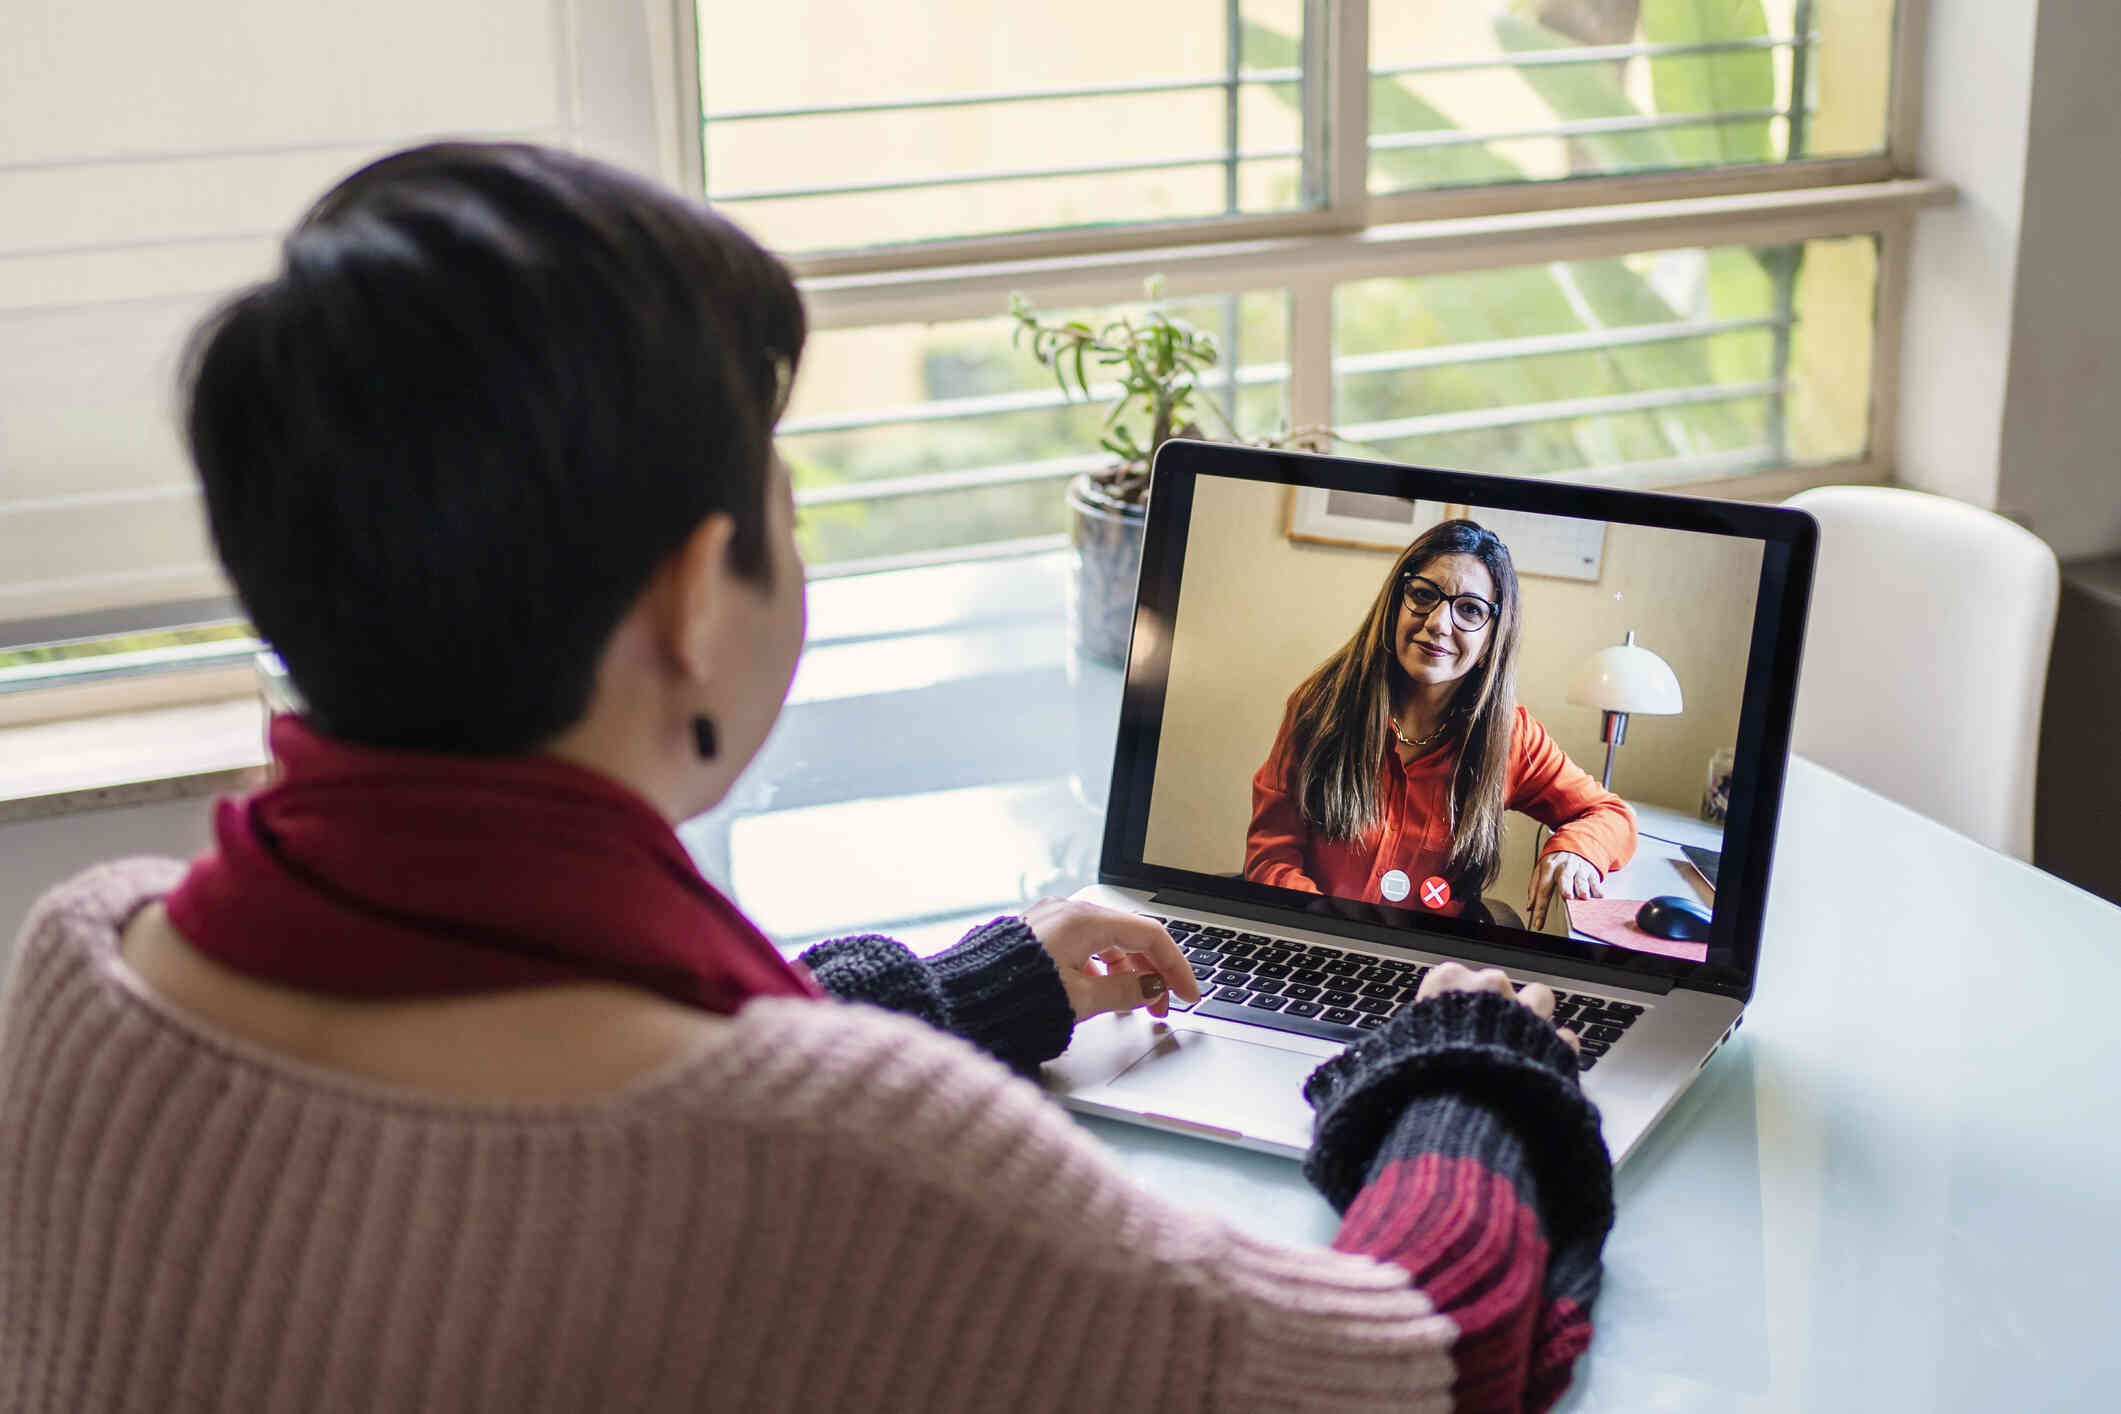 A close up of a woman sitting at a table near a window as she talks to the female therapist on the laptop screen open infront of her during a virtual therapy session.